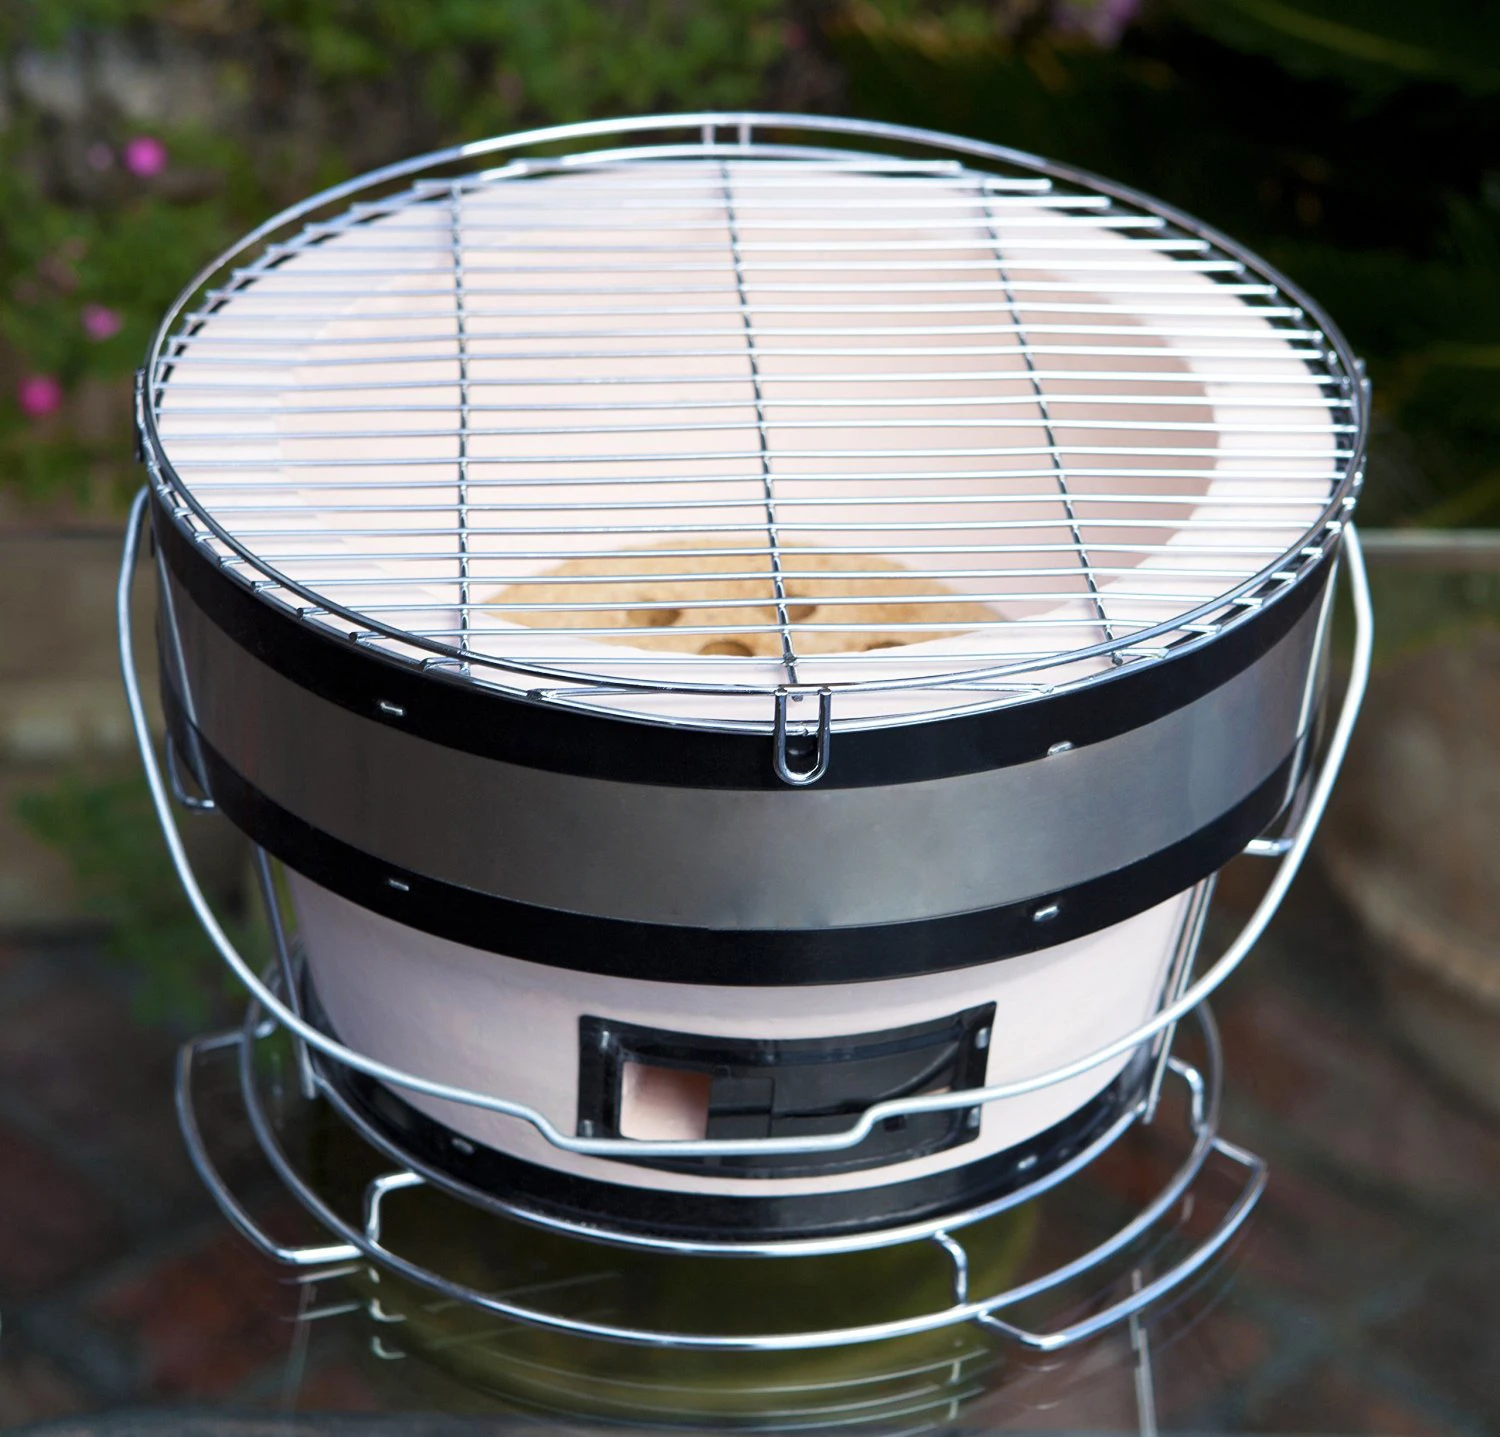 

Hot Selling Bbq Grills Charcoal Backyard Used Portable Mini Japanese Oven Tabletop Indoor Outdoor Cooking Ceramic Grill